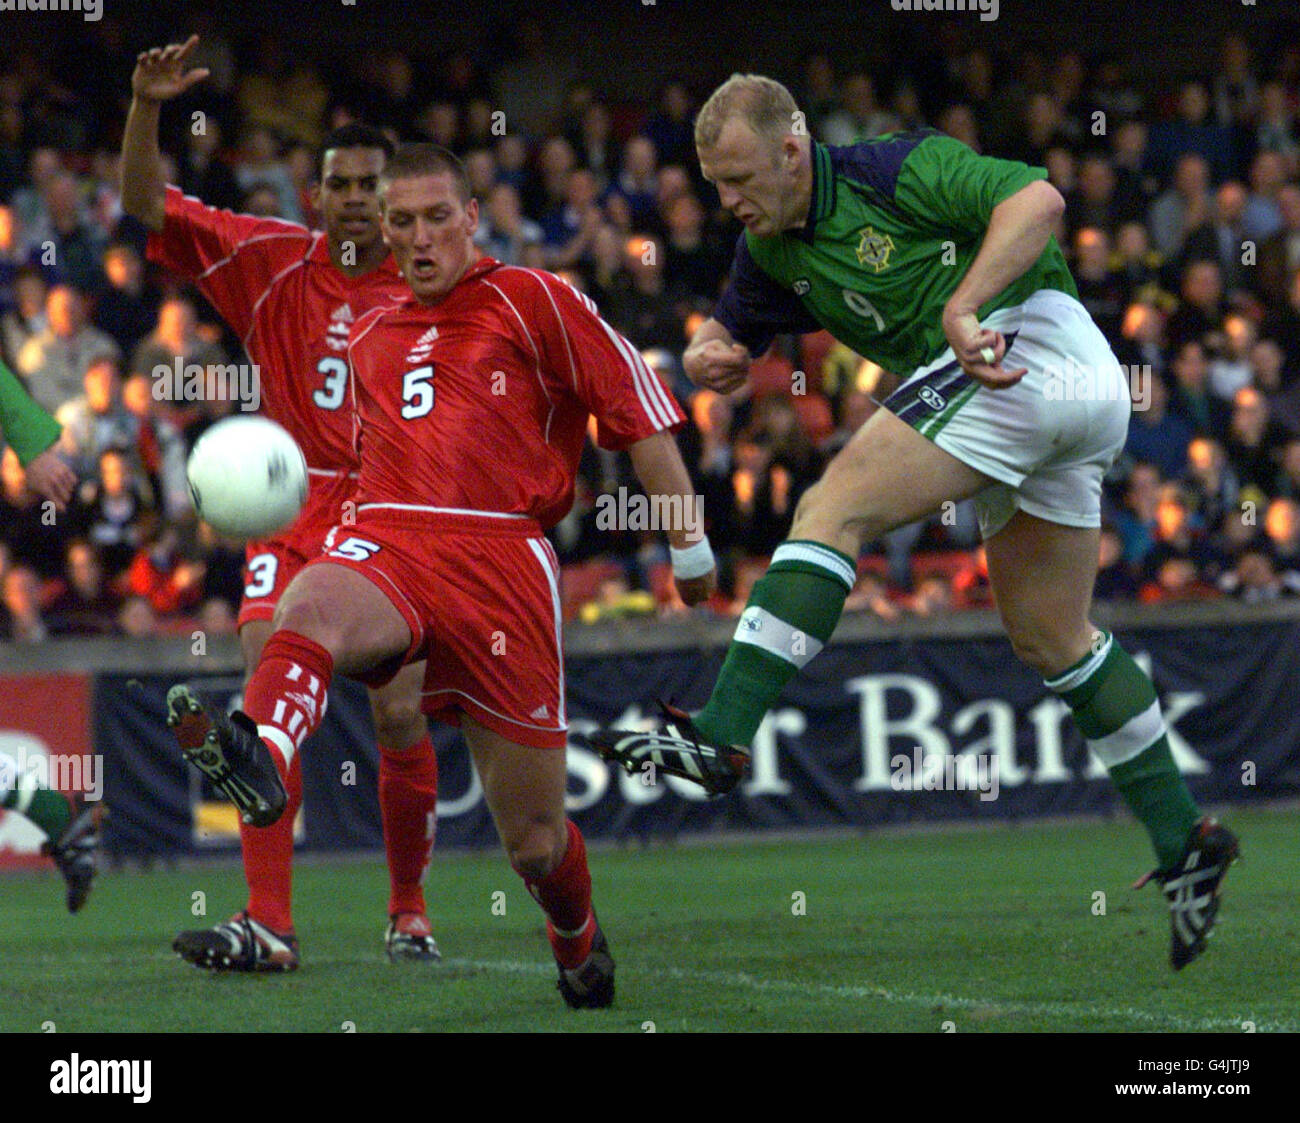 Northern Ireland's Ian Dowie (R) kicks the ball past J Devos (No 5) and B Parker of Canada, during their international friendly football match at Windsor Park, Belfast. Stock Photo